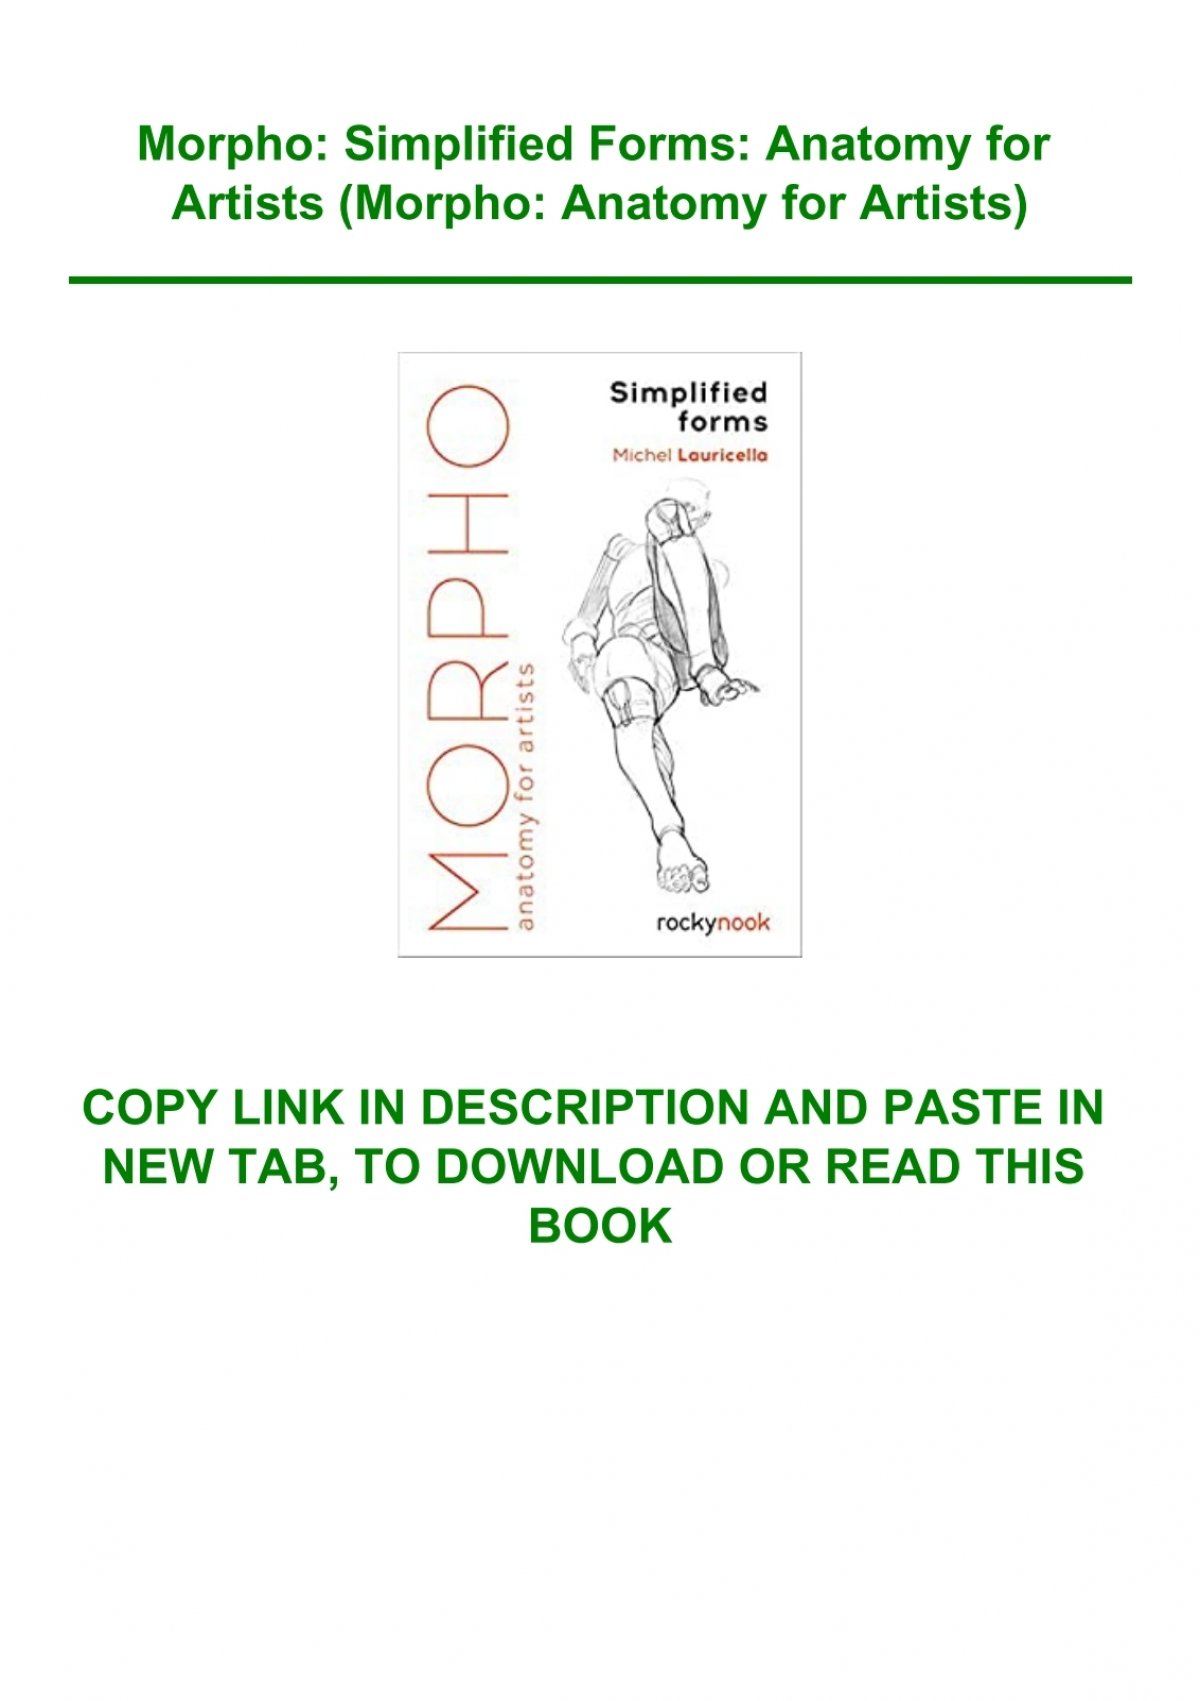 pdf-morpho-simplified-forms-anatomy-for-artists-morpho-anatomy-for